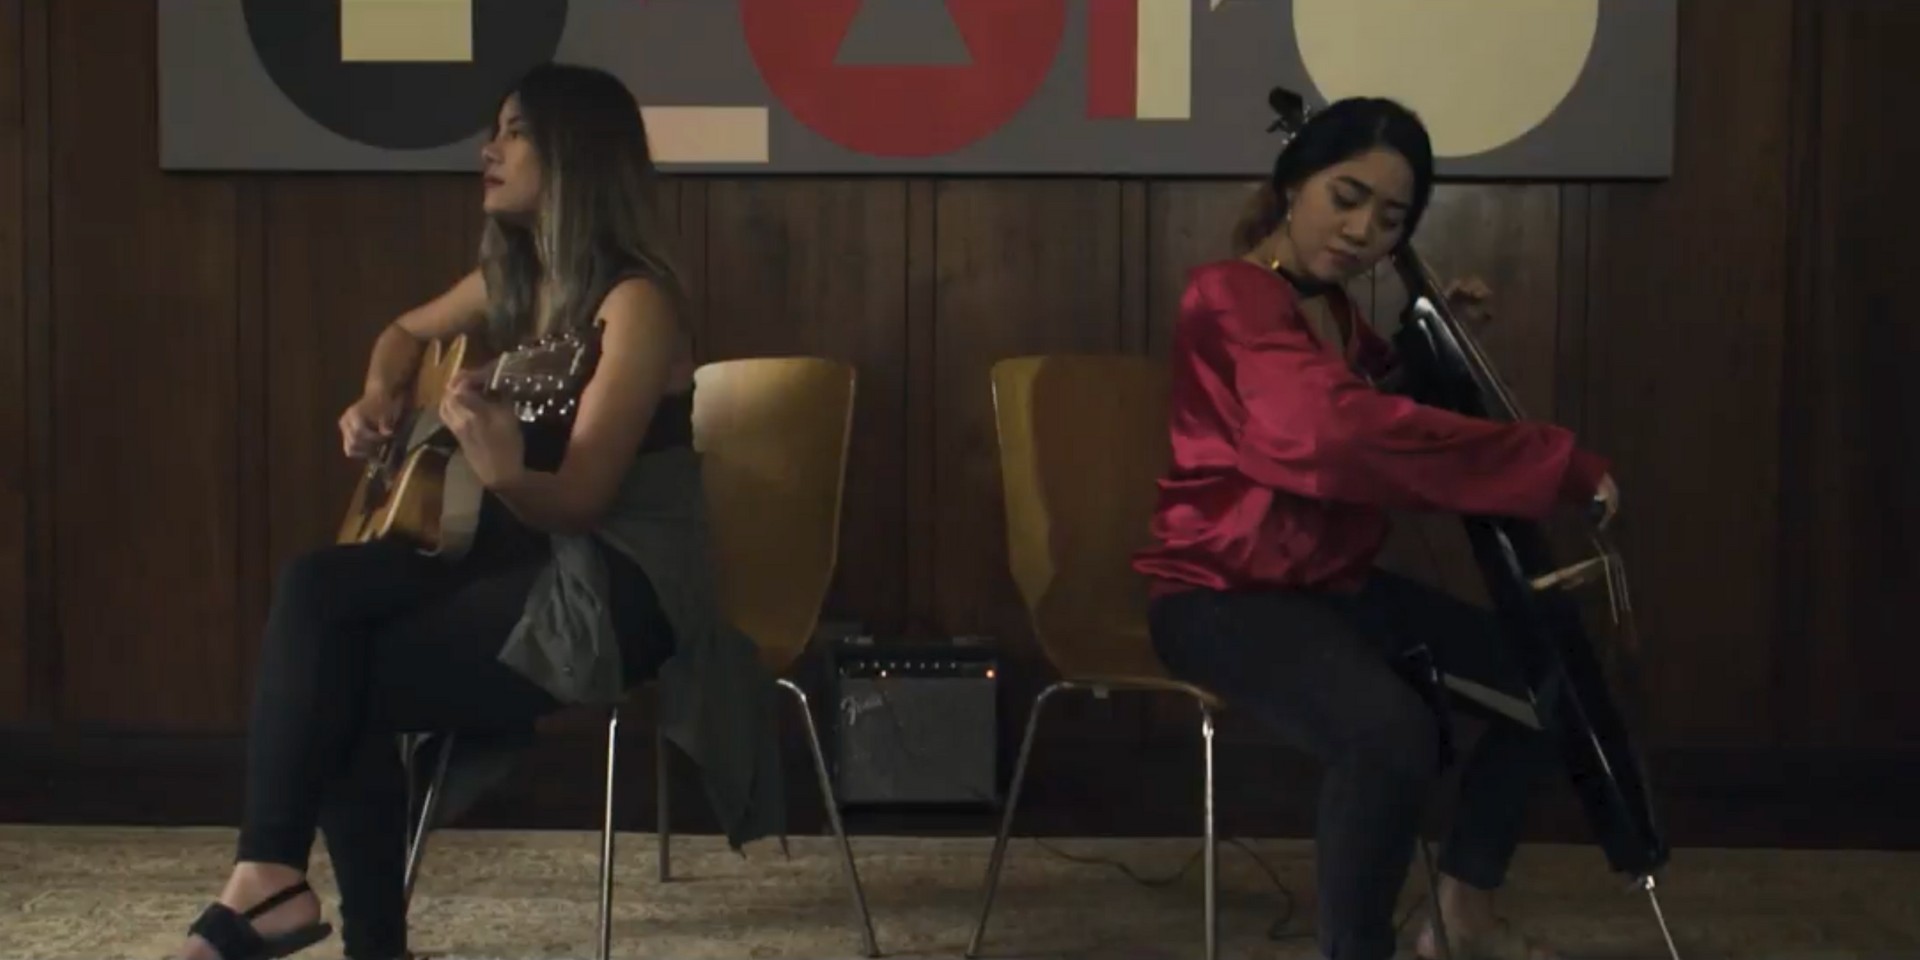 Stages Sessions presents a Valentine's Day playlist with Keiko Necesario and Coeli – watch